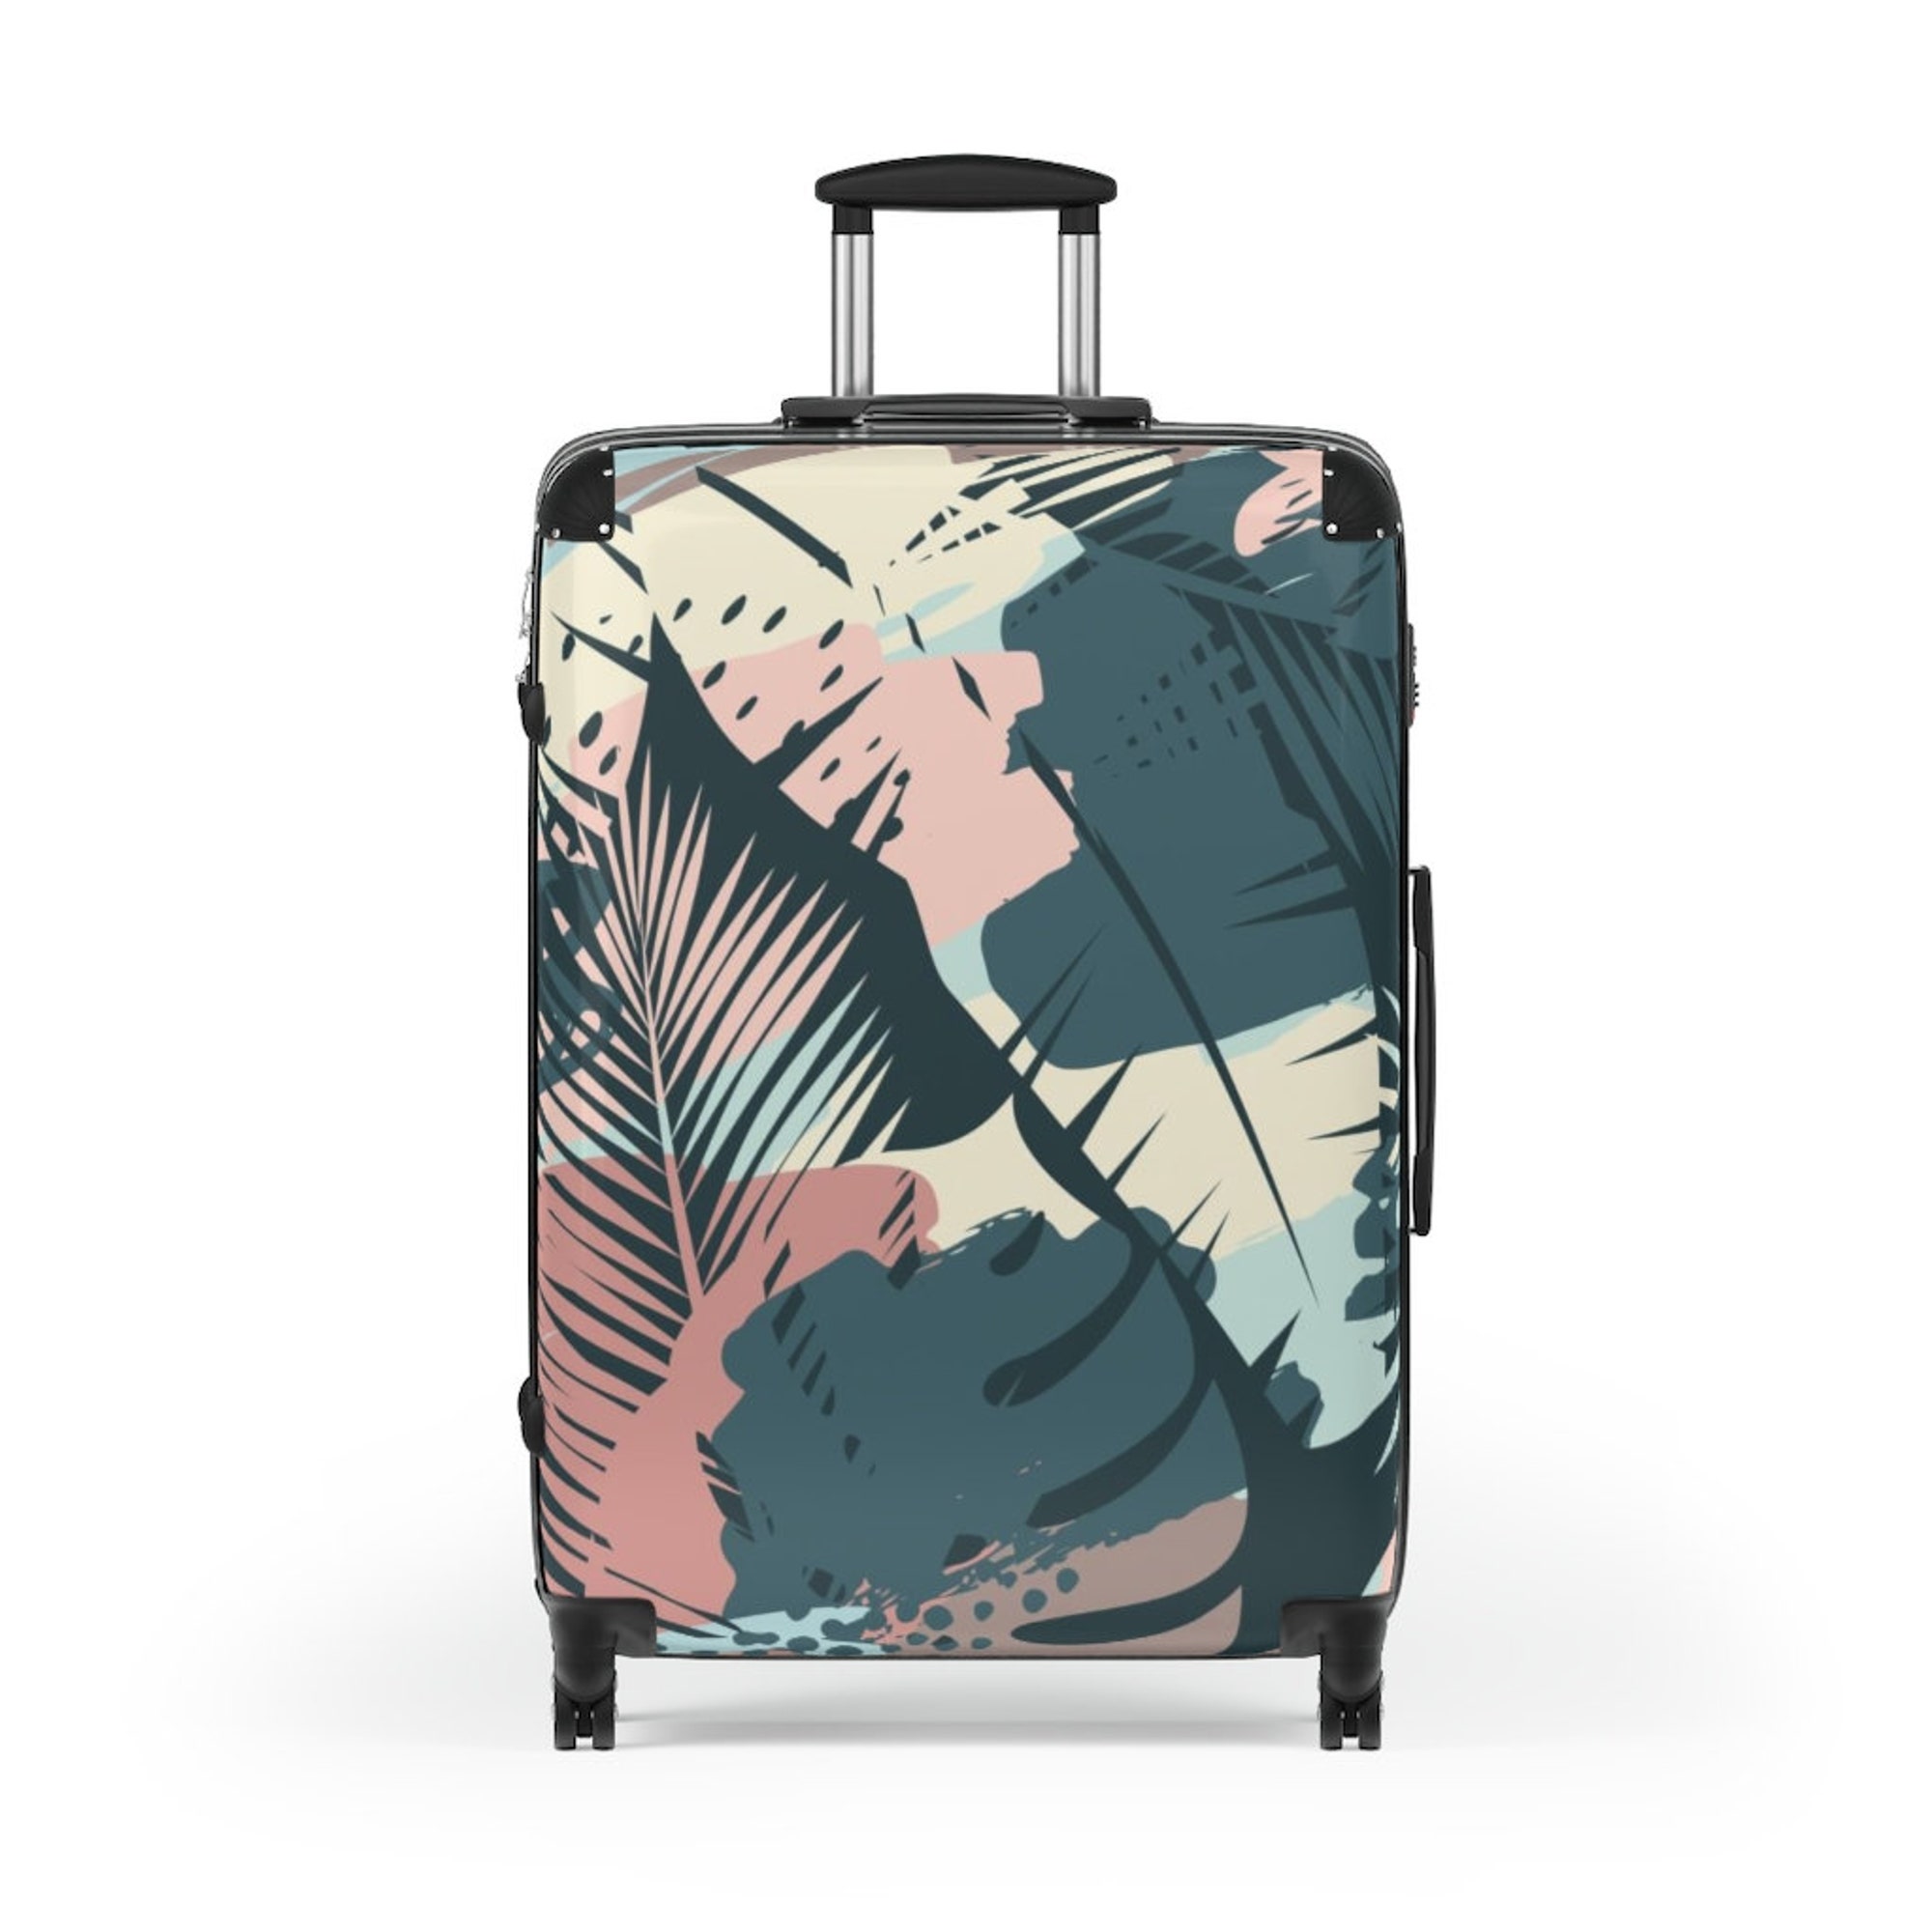 Discover The Cayman Suitcase